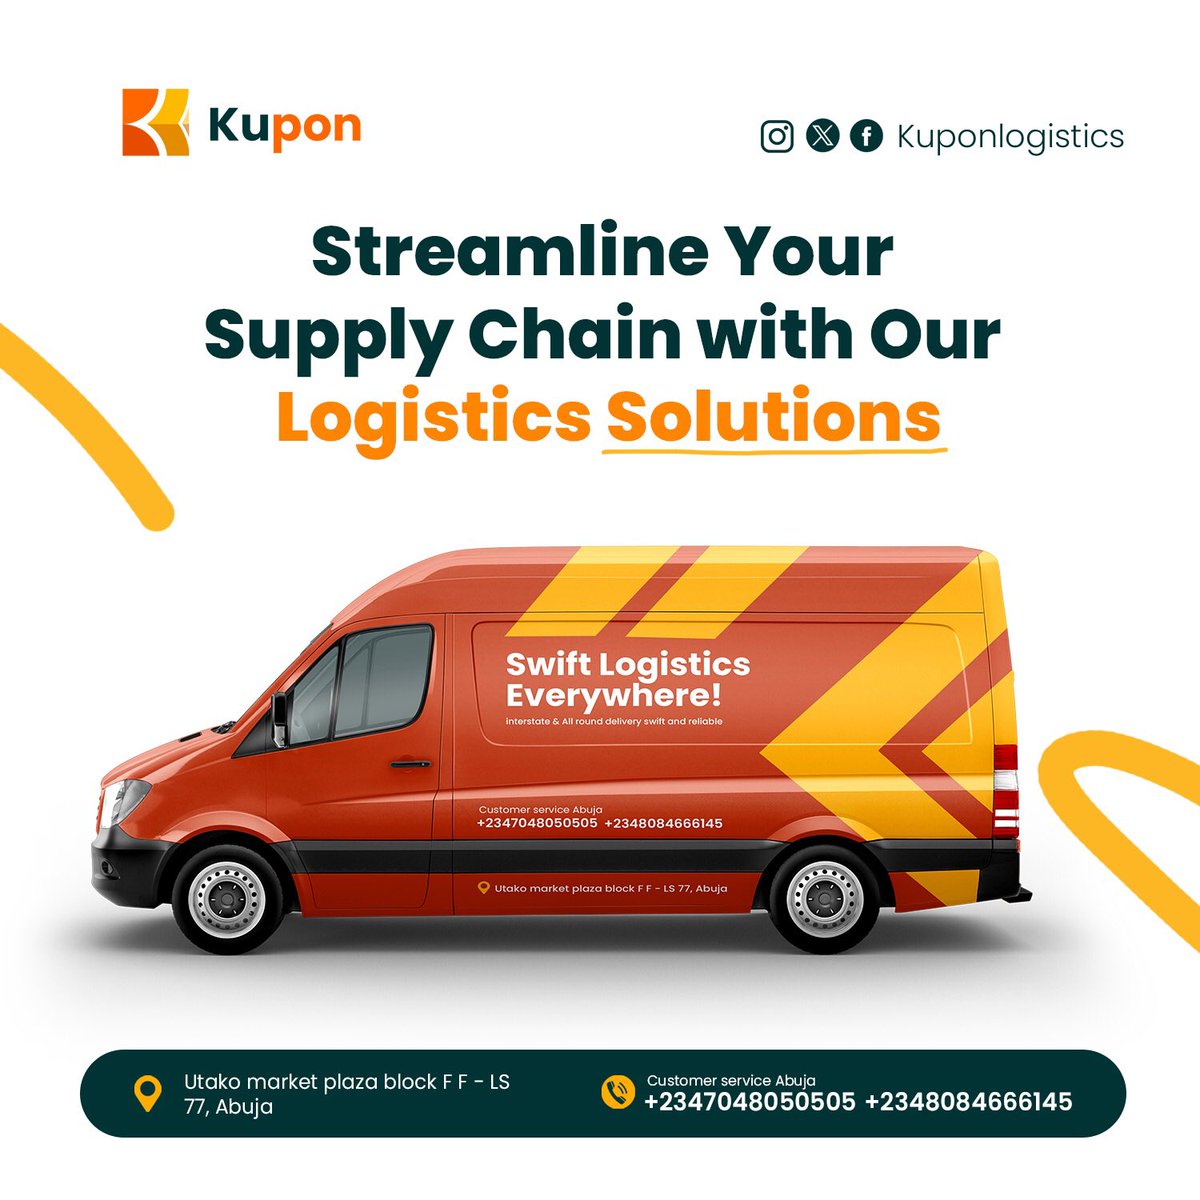 When it comes to shipping your items we’ll go extra mile to deliver your package anywhere you want.

Visit our experience center or ship your items with Kupon app today. 

#kuponlogistics
#logisticsservices
#logisticscompany
#warehousing
#sentpackage
#wedeliver